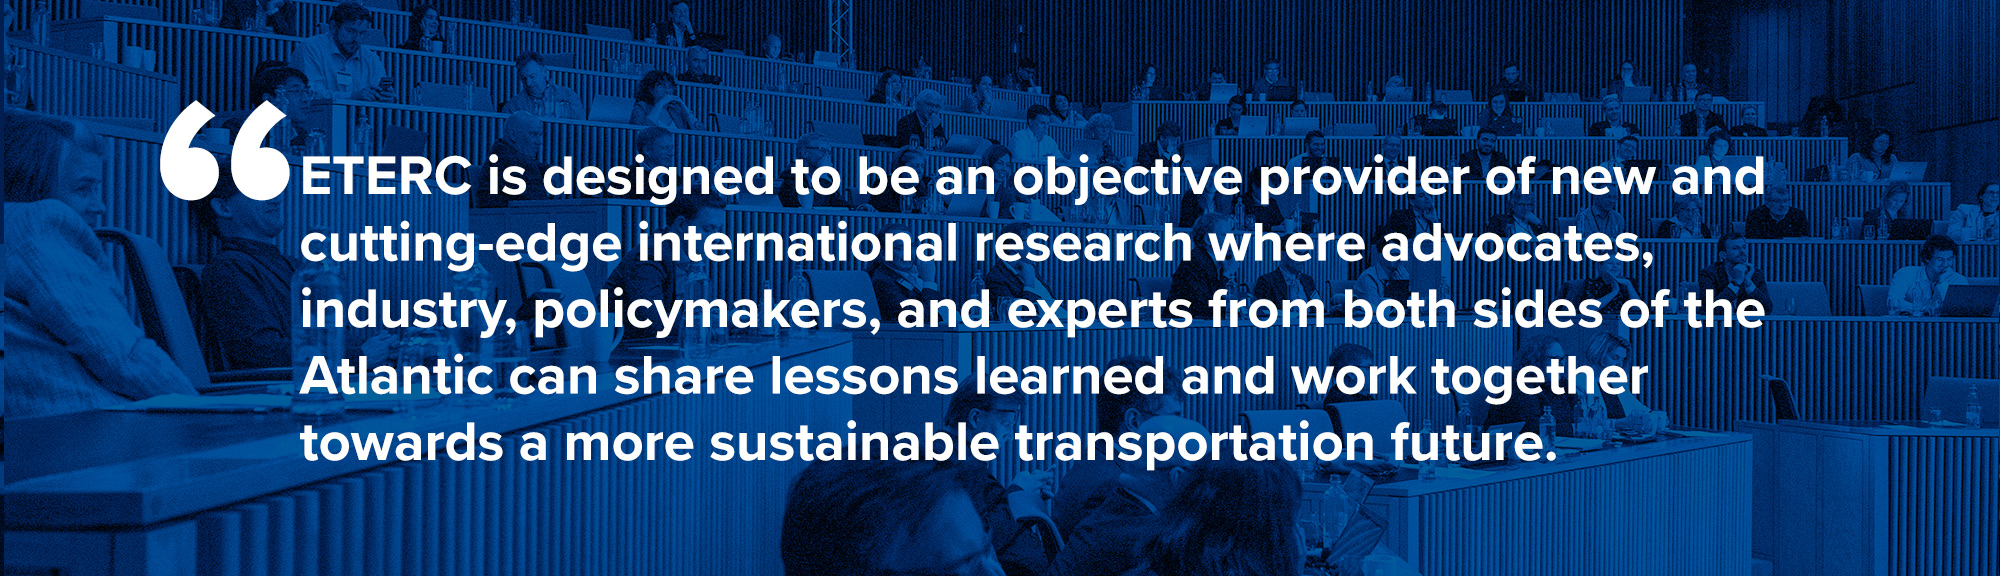 Eterc Mission Statement - ETERC is designed to be an objective provider of new and cutting-edge international research where advocates, industry, policymakers, and experts from both sides of the Atlantic can share lessons learned and work together towards a more sustainable transportation future.